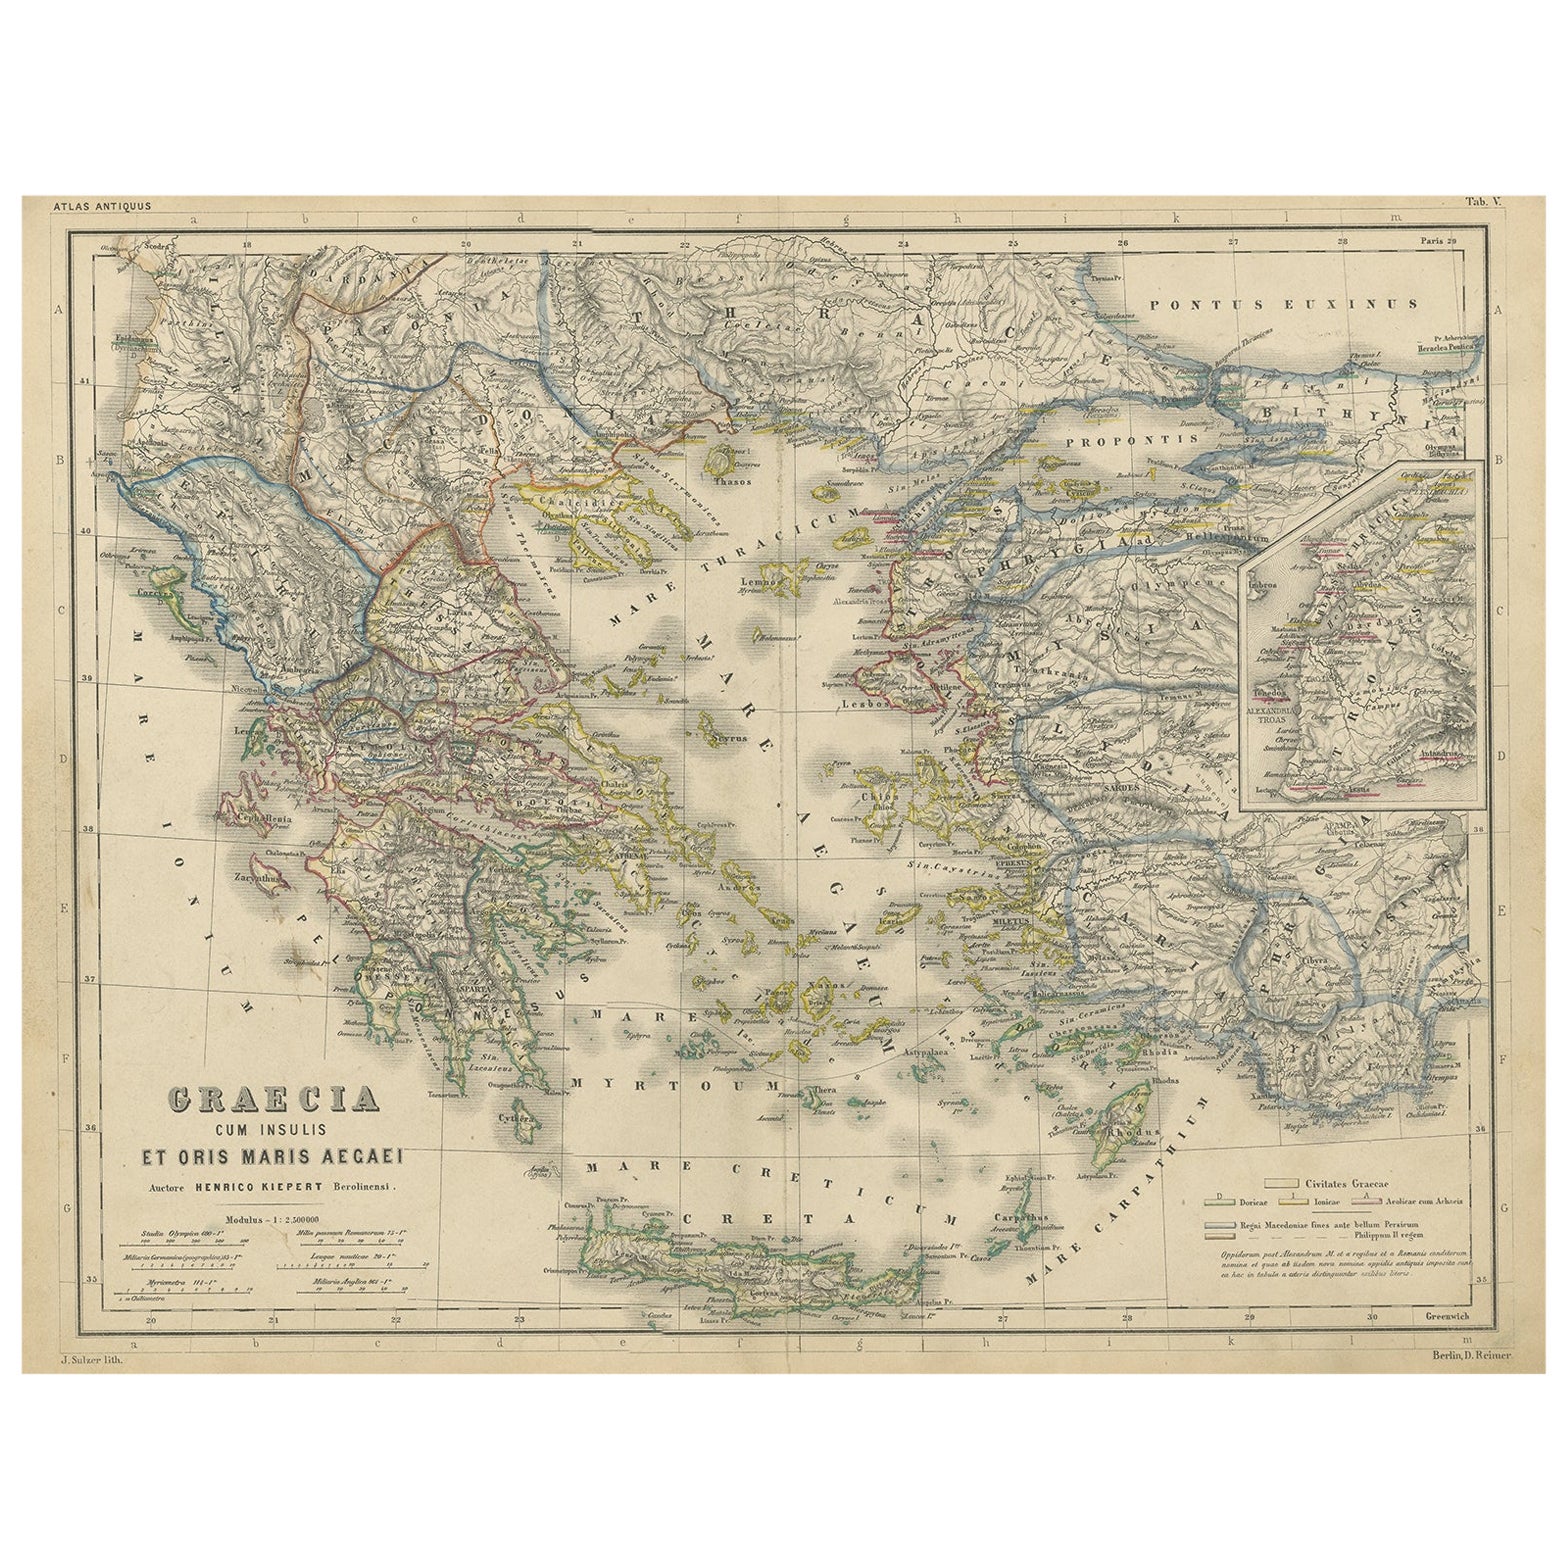 Antique Map of Greece and Surrounding Islands with an Inset Map of Troas, c.1870